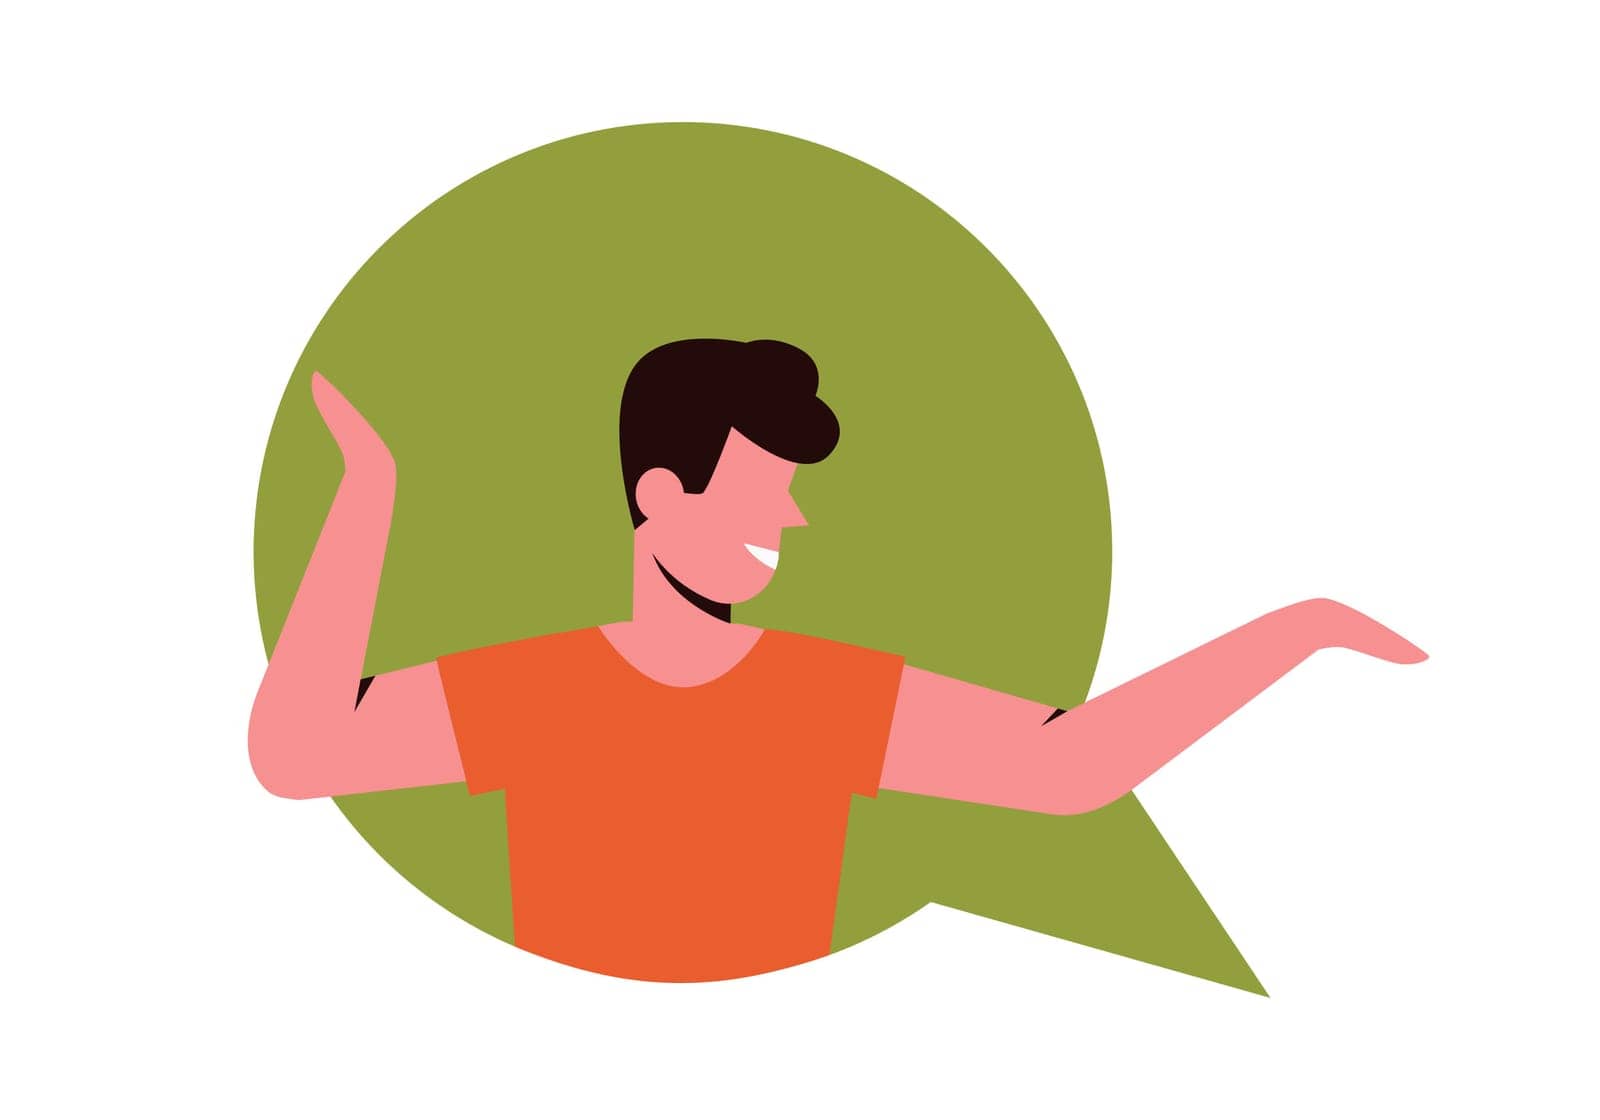 Man in message bubble. People communication, messaging network flat illustration